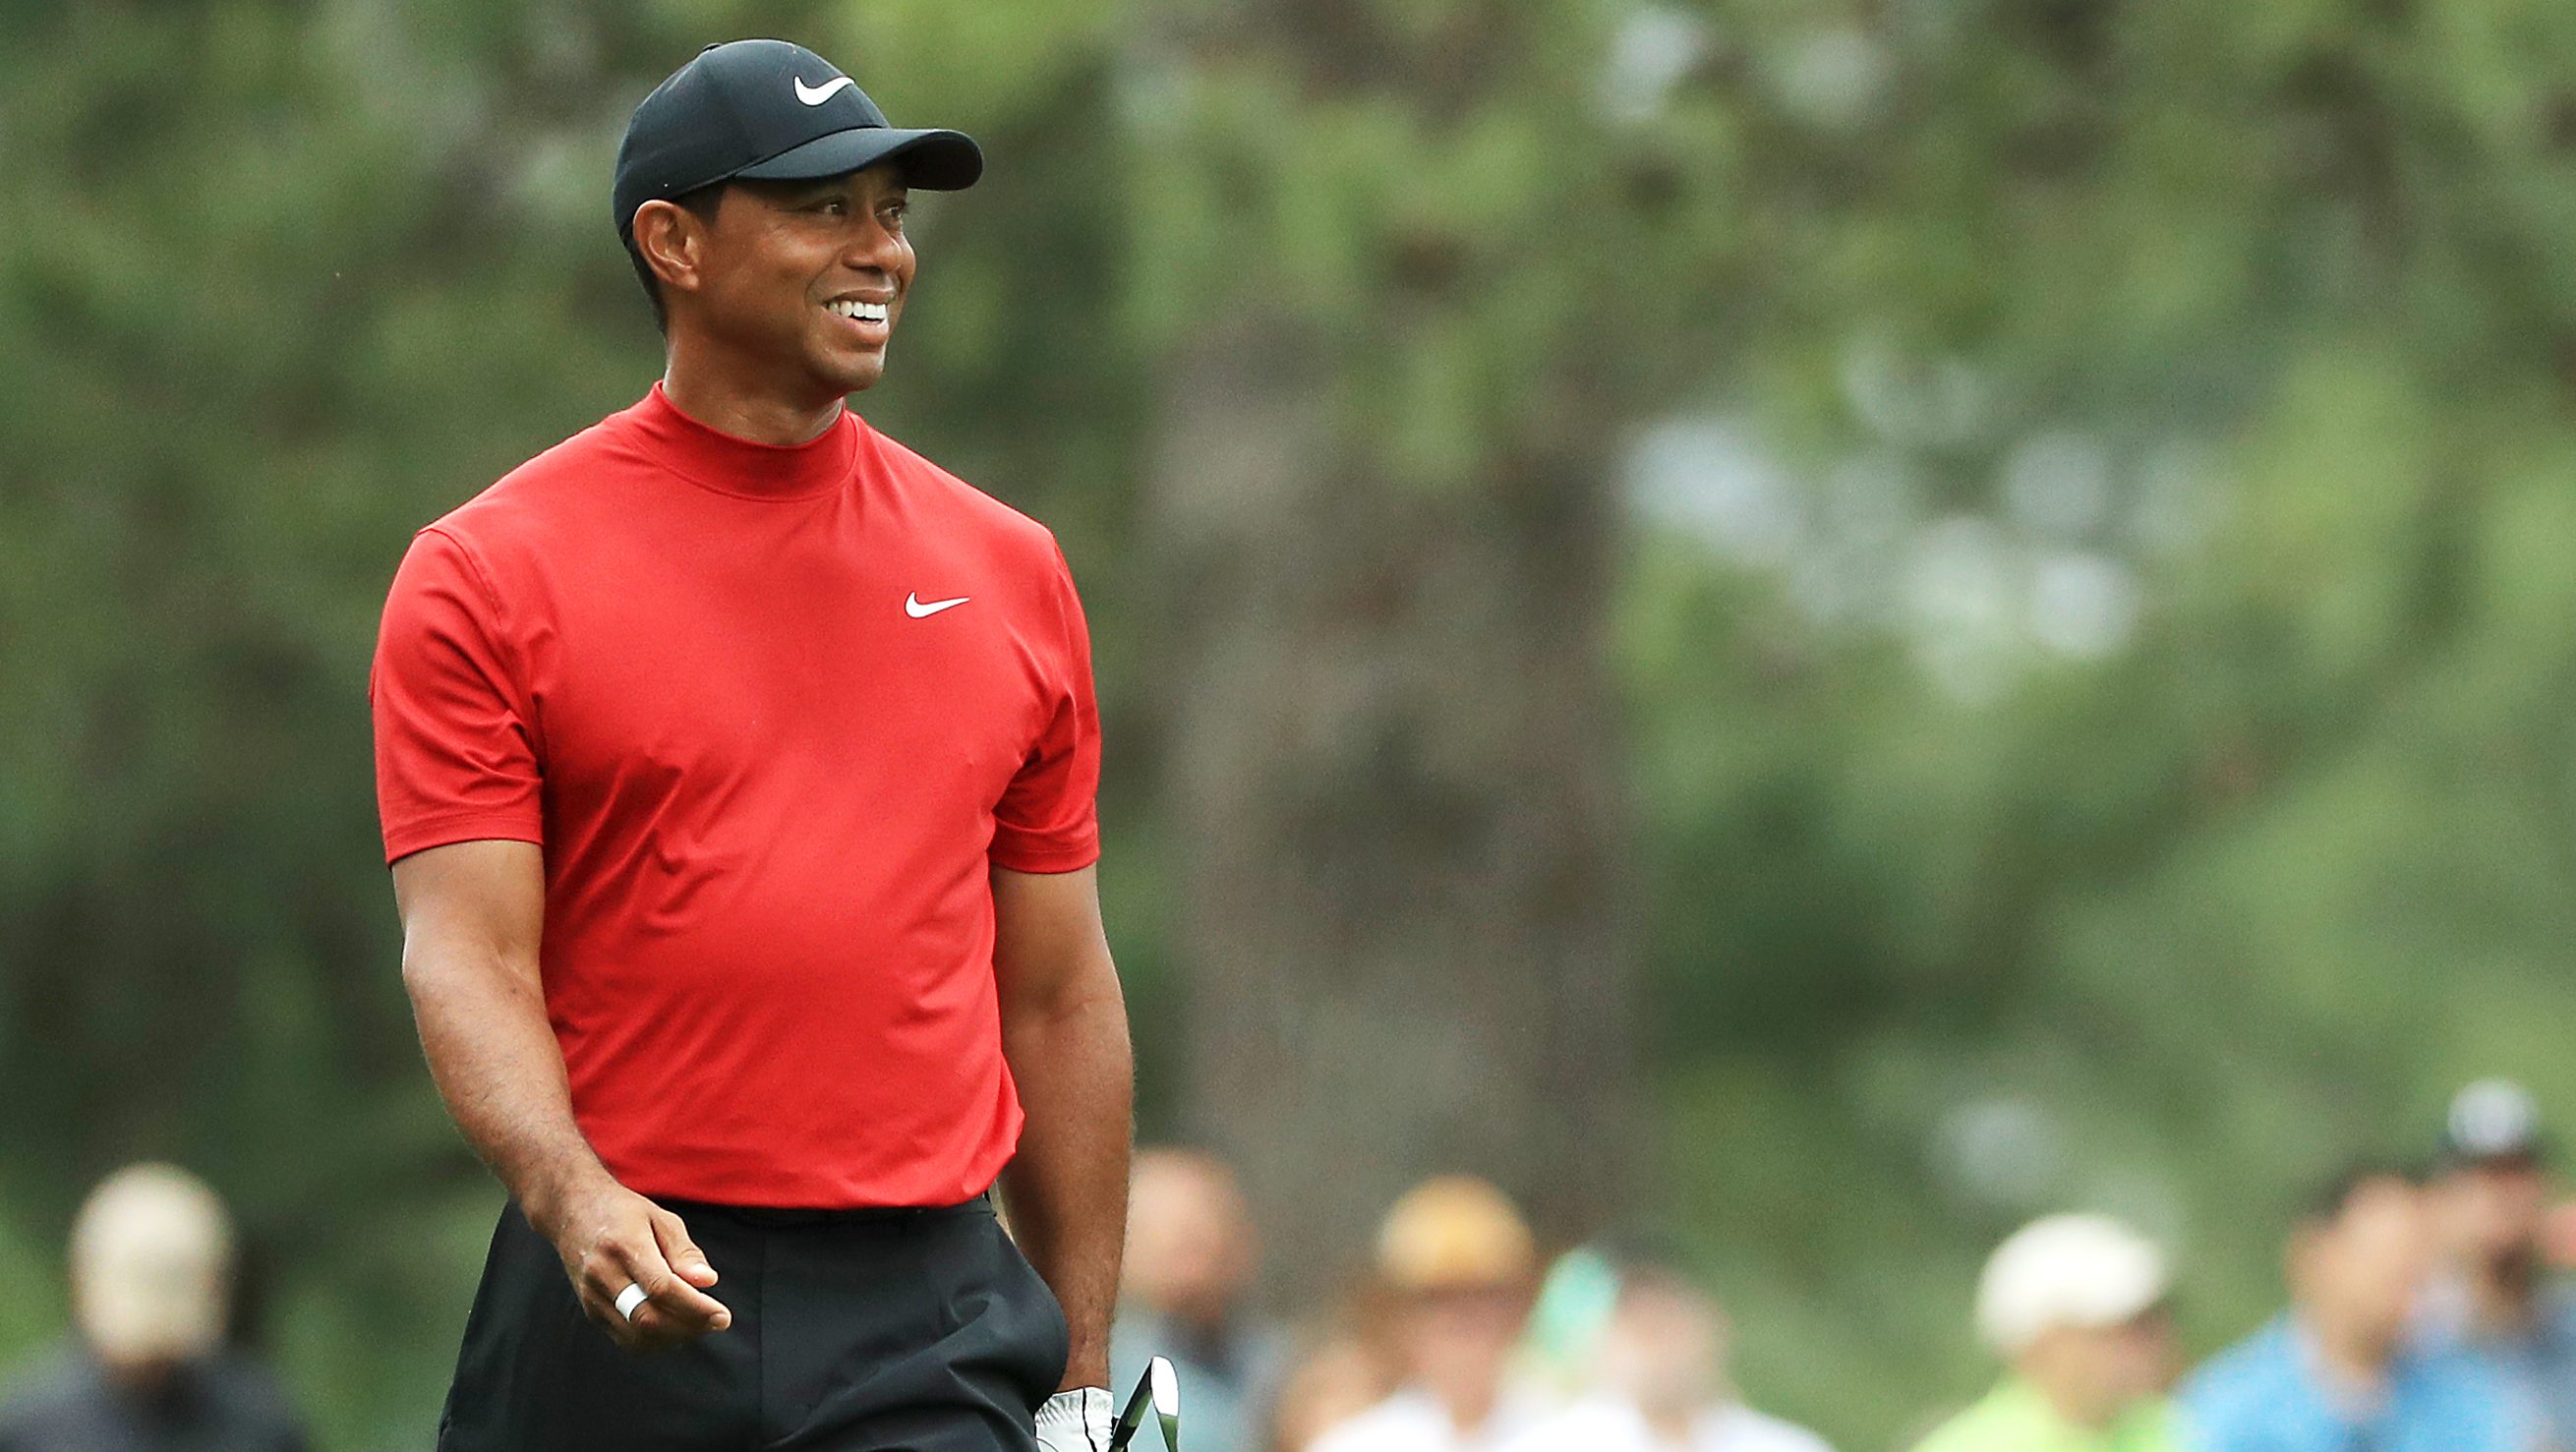 Tiger Woods Wins the Masters for His First Major Title Since 2008